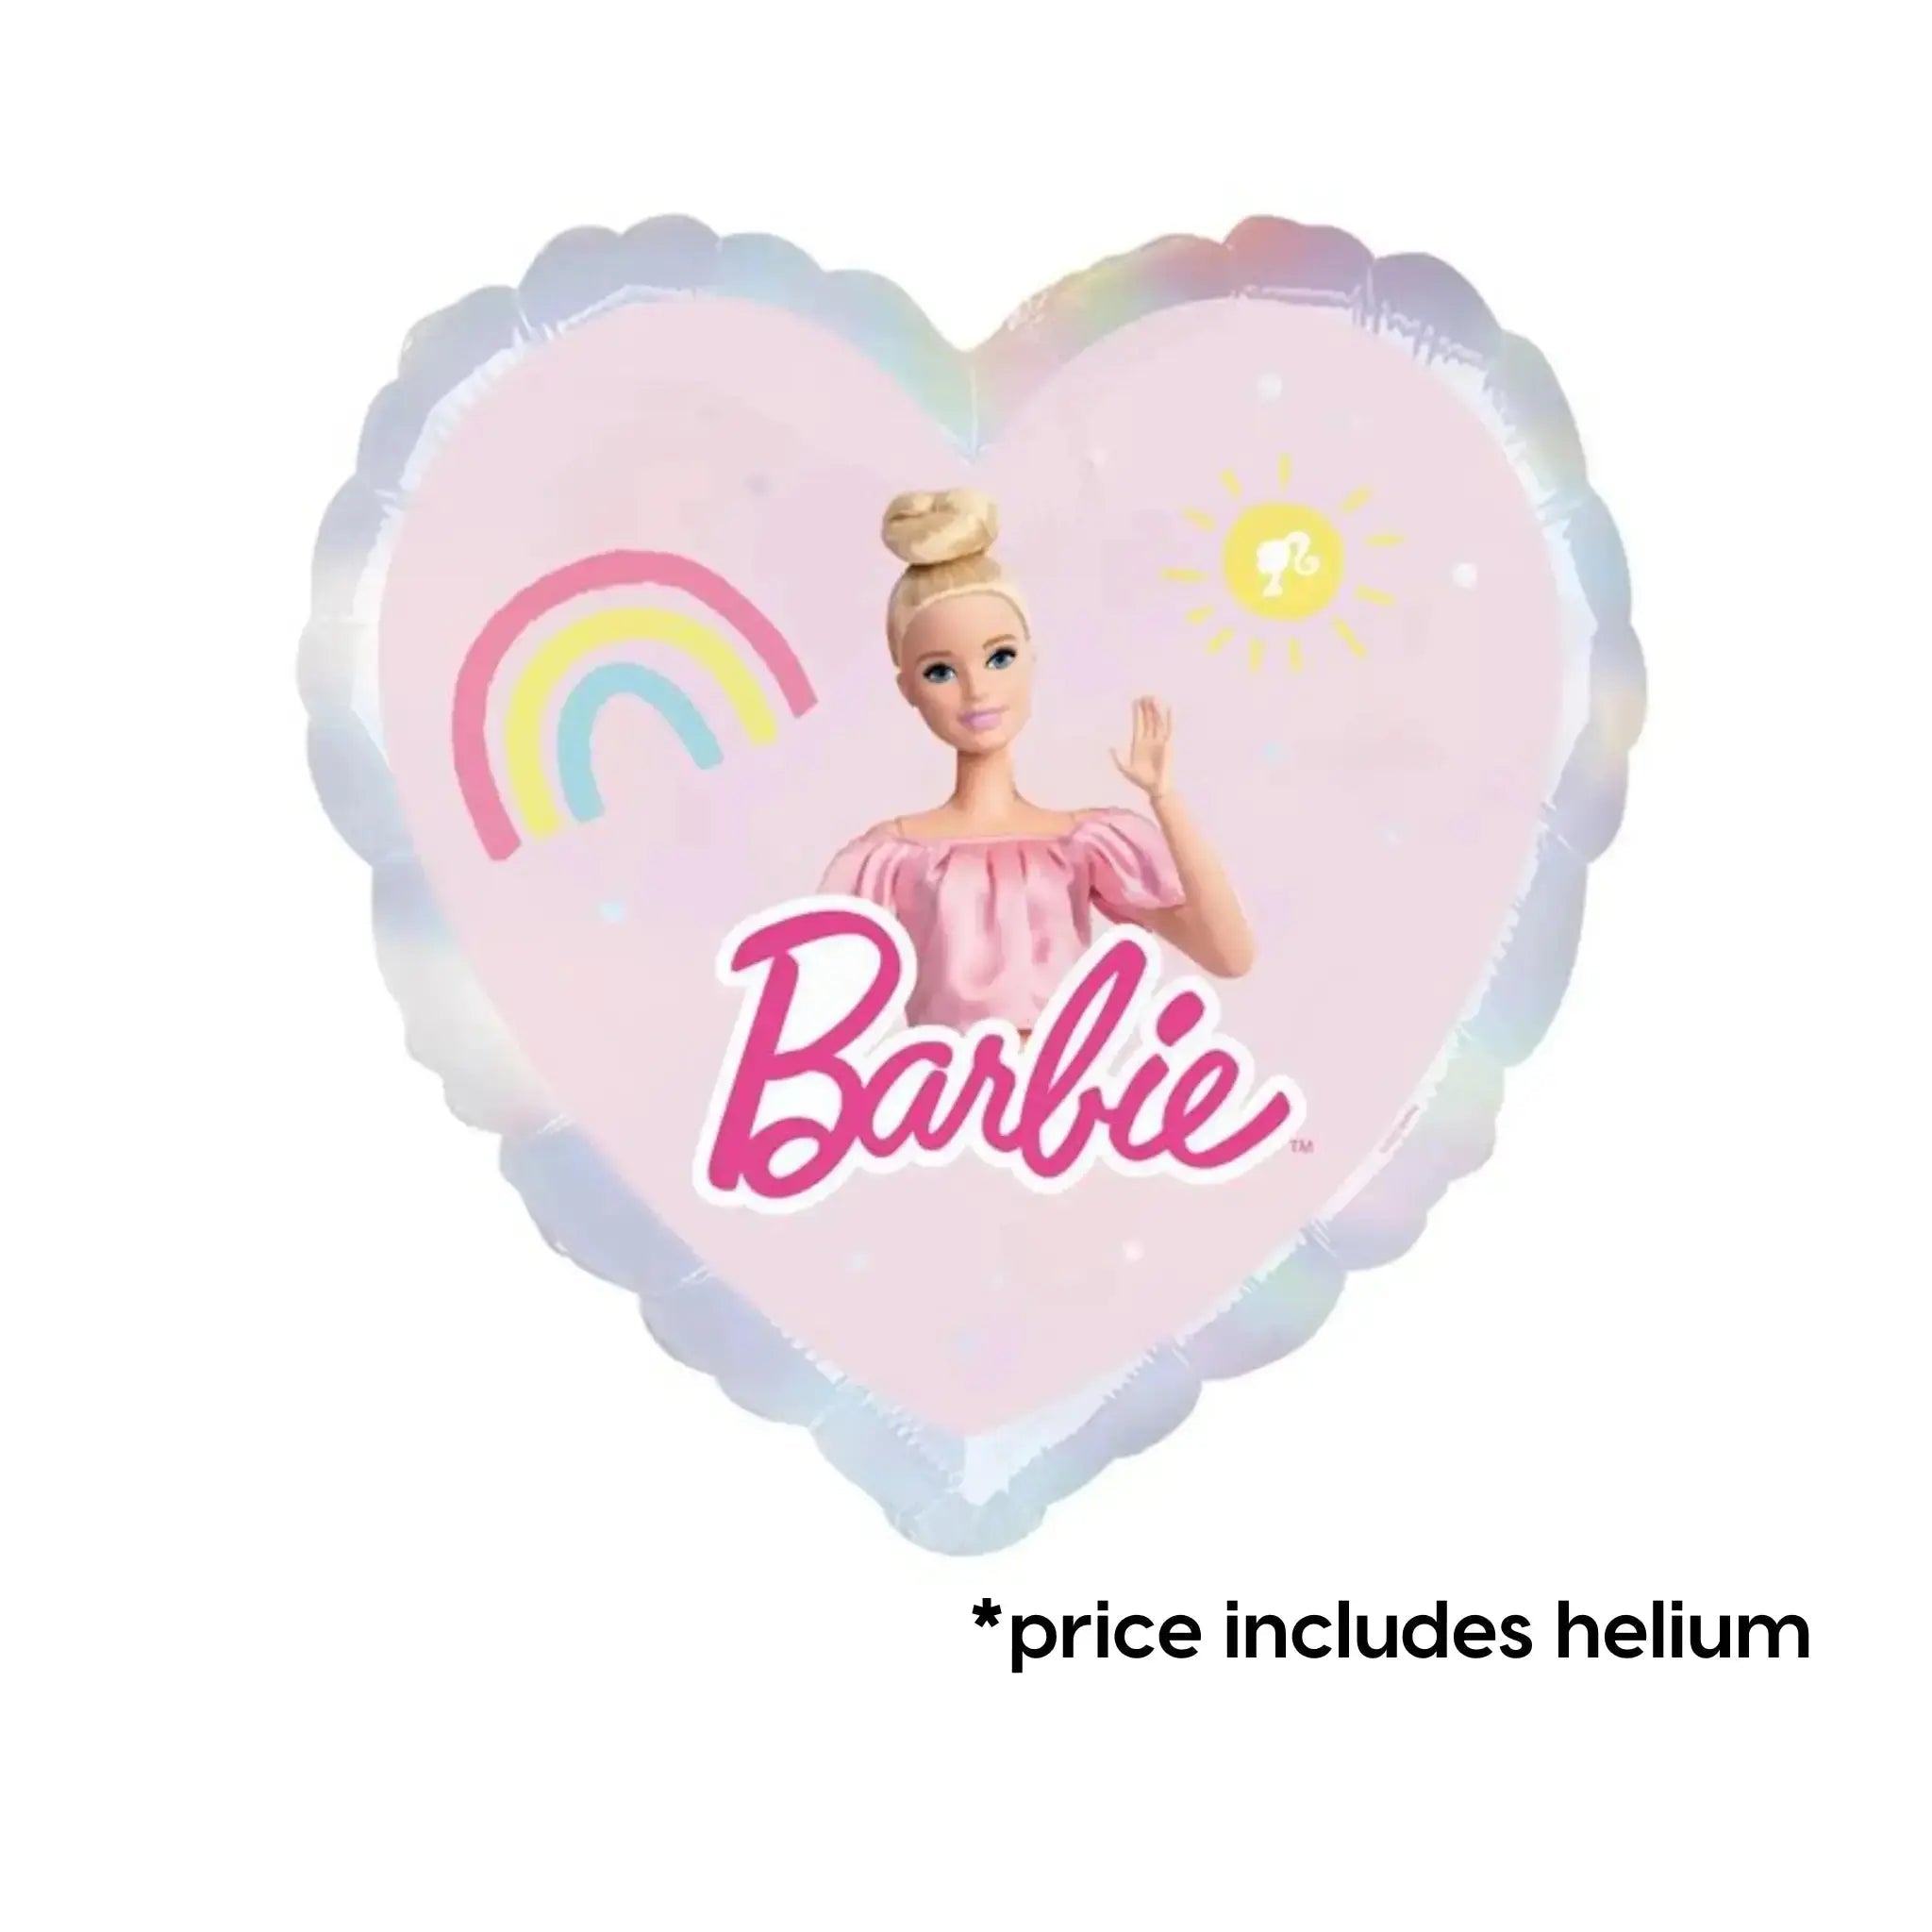 Barbie Balloon | The Party Hut